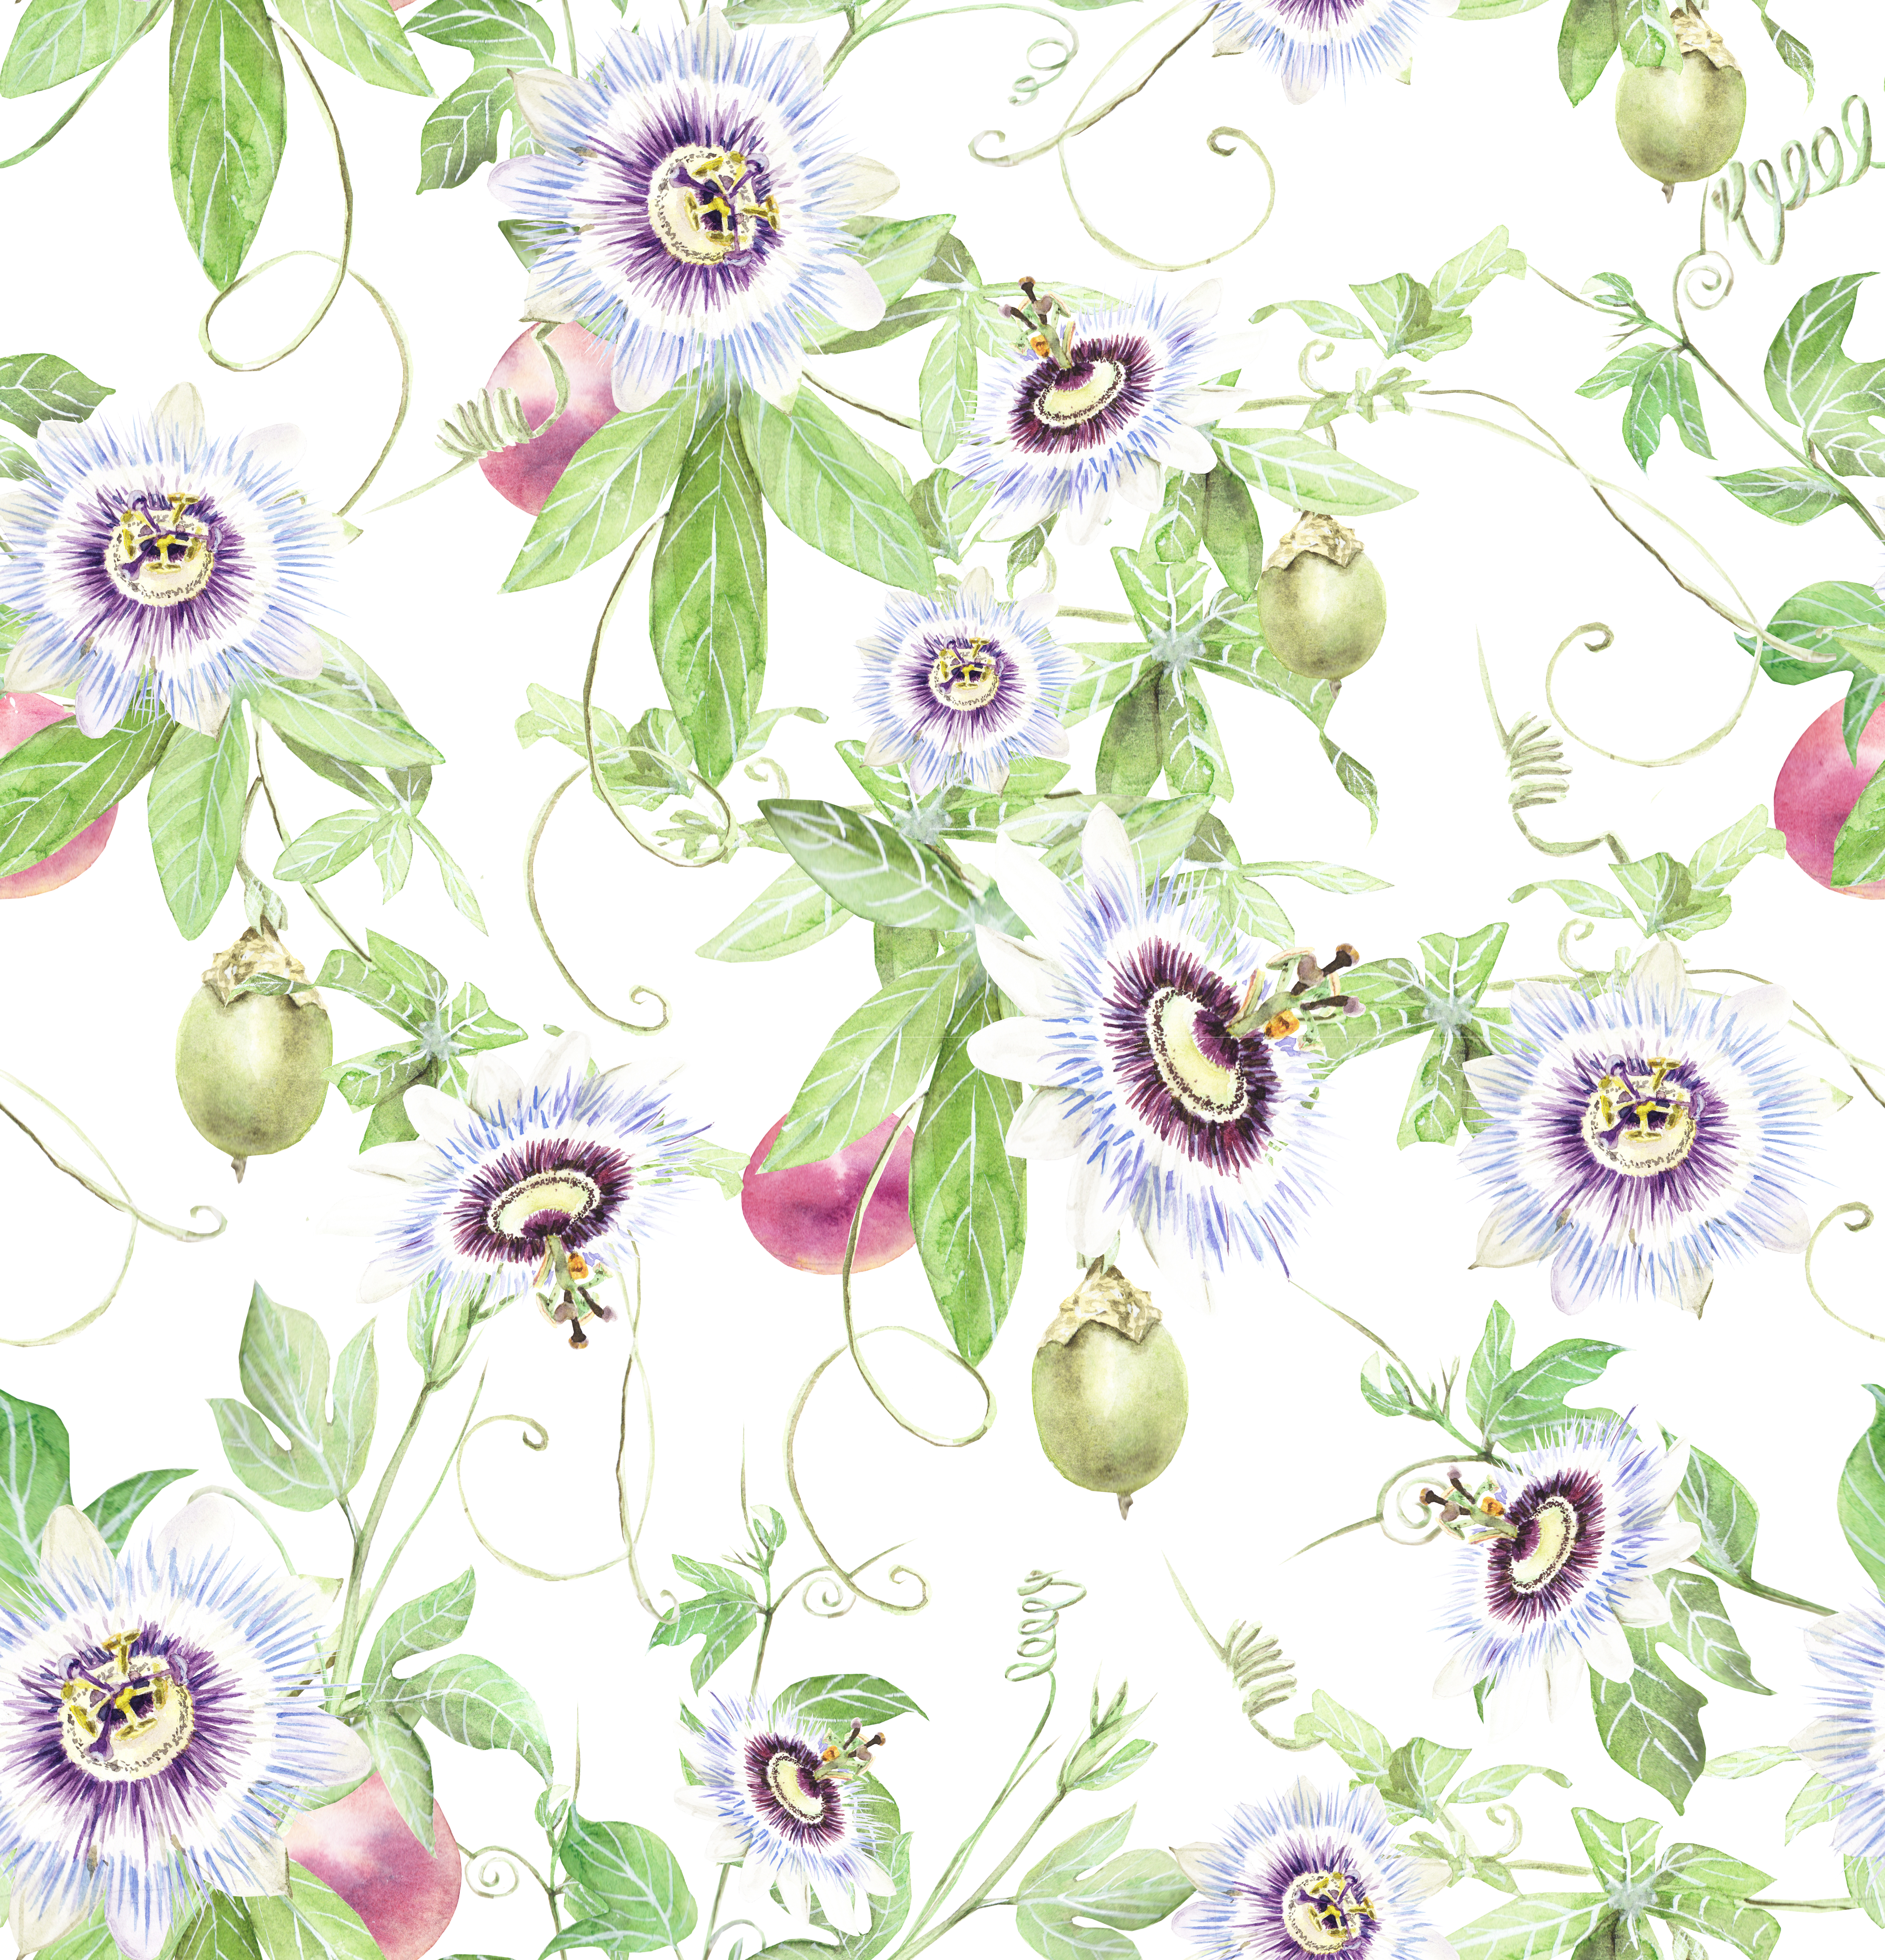 Pattern of flowers of pasiflora and passion fruit isolated on a white background